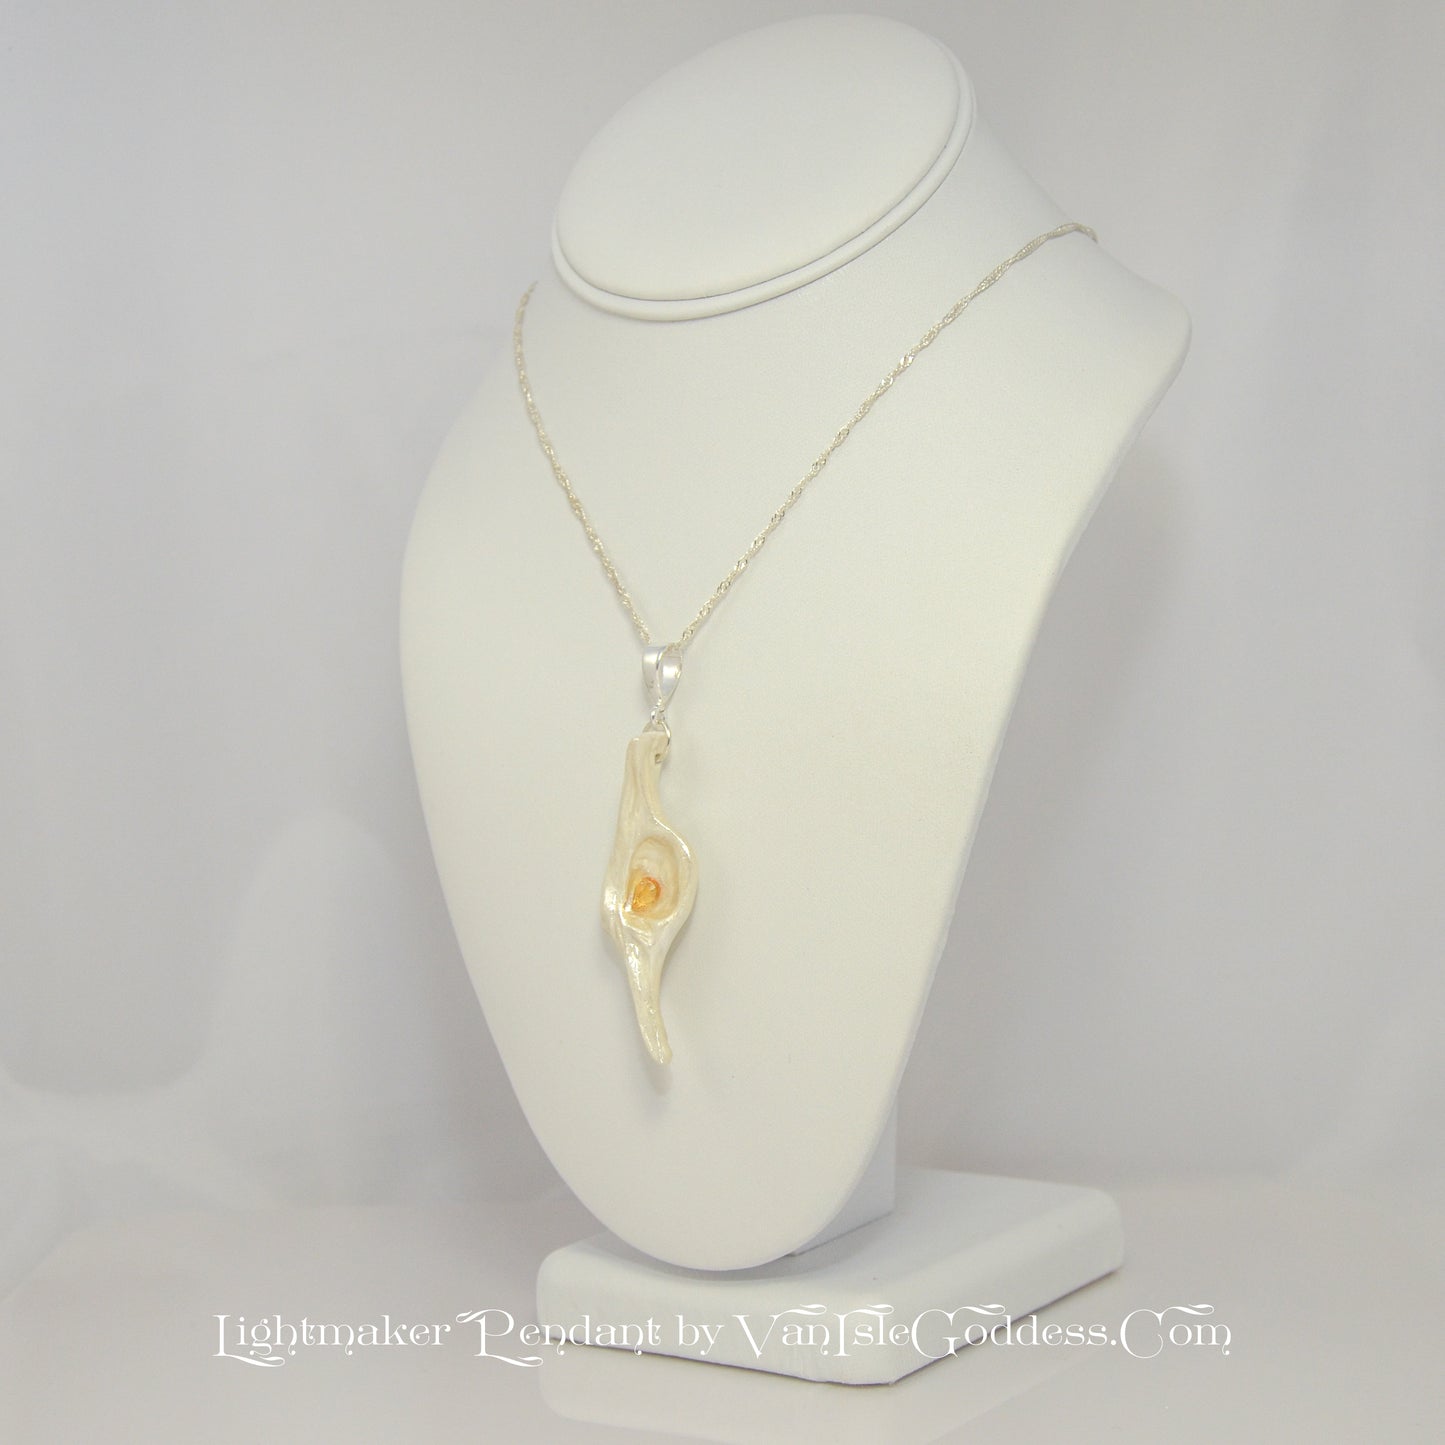 Lightmaker natural seashell pendant A beautiful pear shaped rose cut Citrine compliments the pendant. The pendant is turned to show the viewer the left side of the pendant.